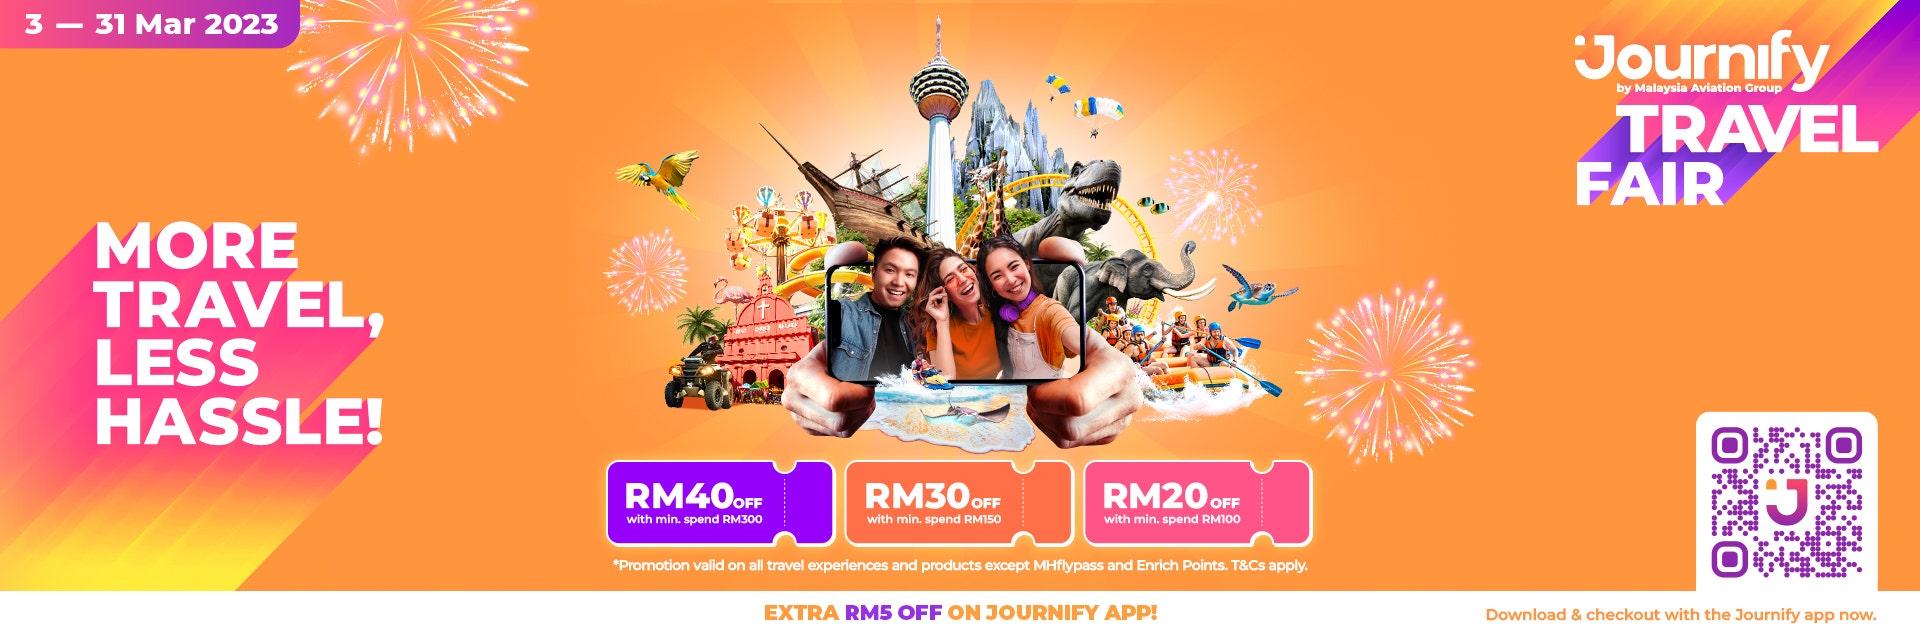 Journify Travel Fair Campaign 2023 Promo Page